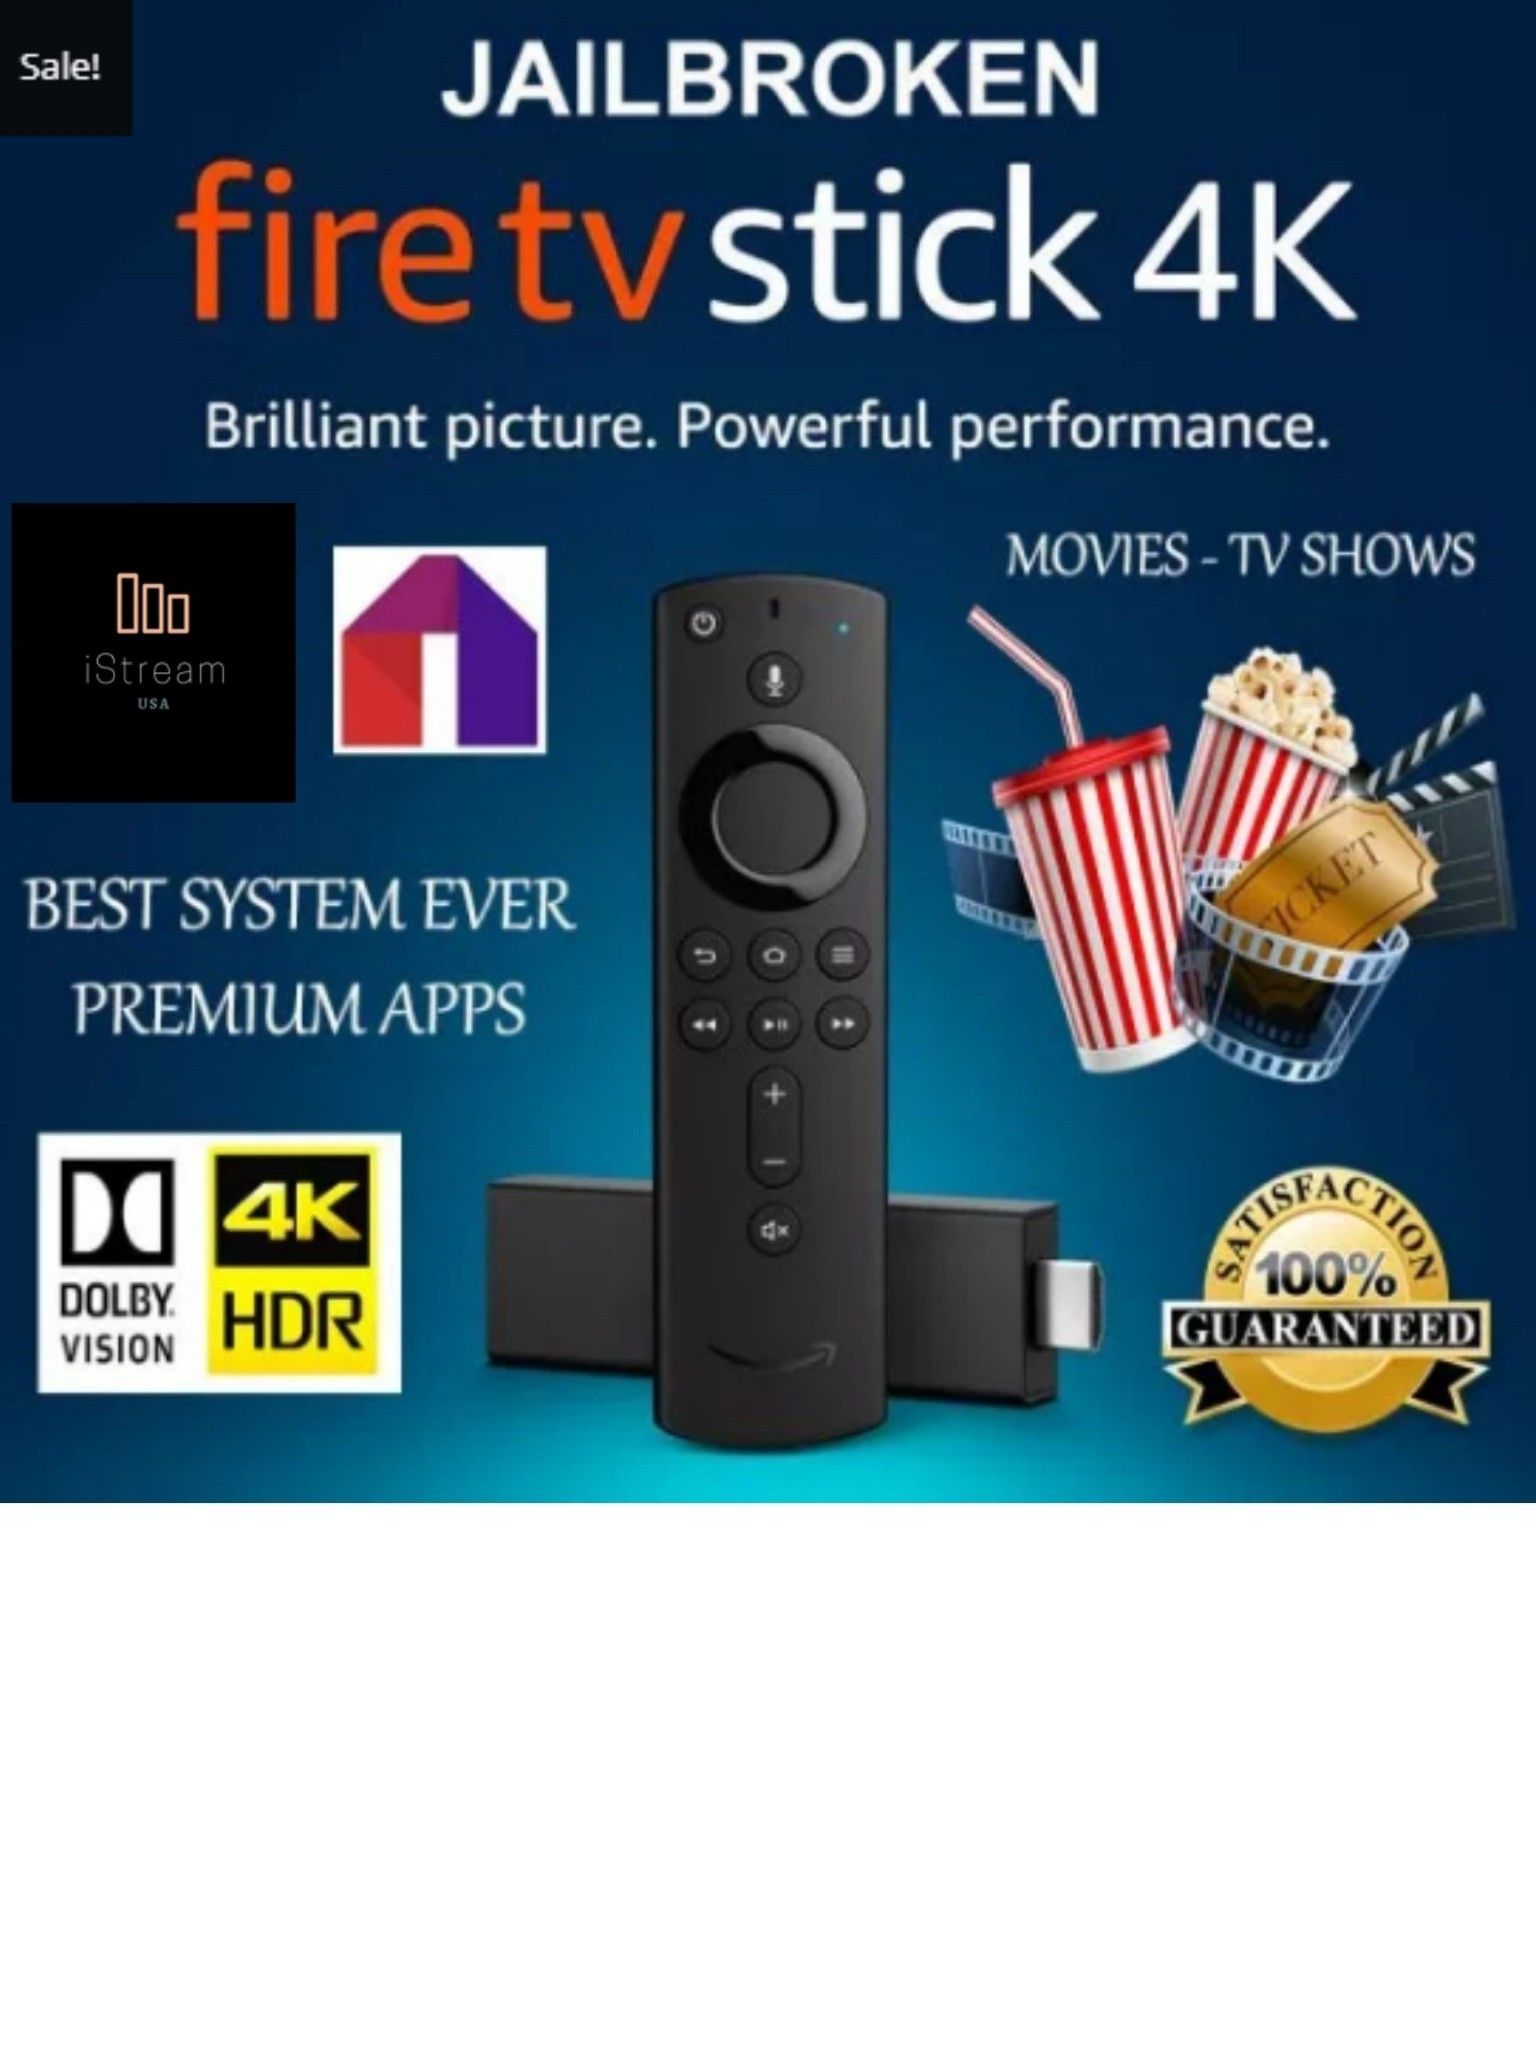 Fire TV Stick 4K Jailbroken & Fully Loaded! Free Live TV, Movies, VOD, Sports, Music, Kids and more!